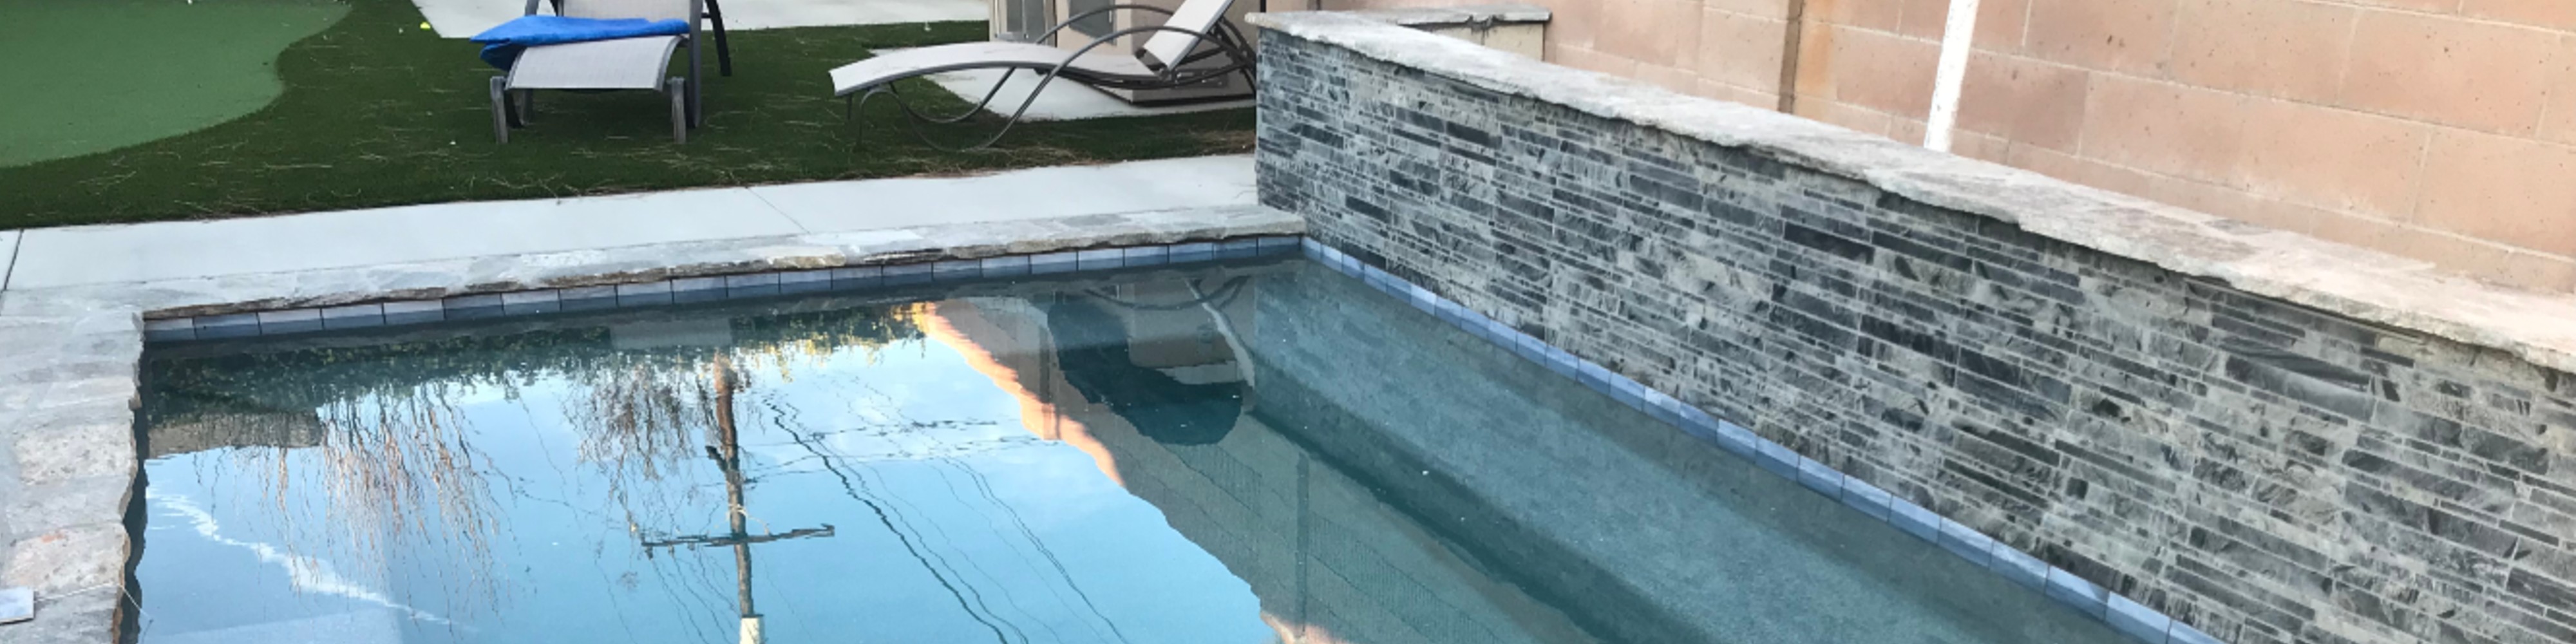 Alan Smith Pool Plastering & Remodeling|New Pool Construction Gallery